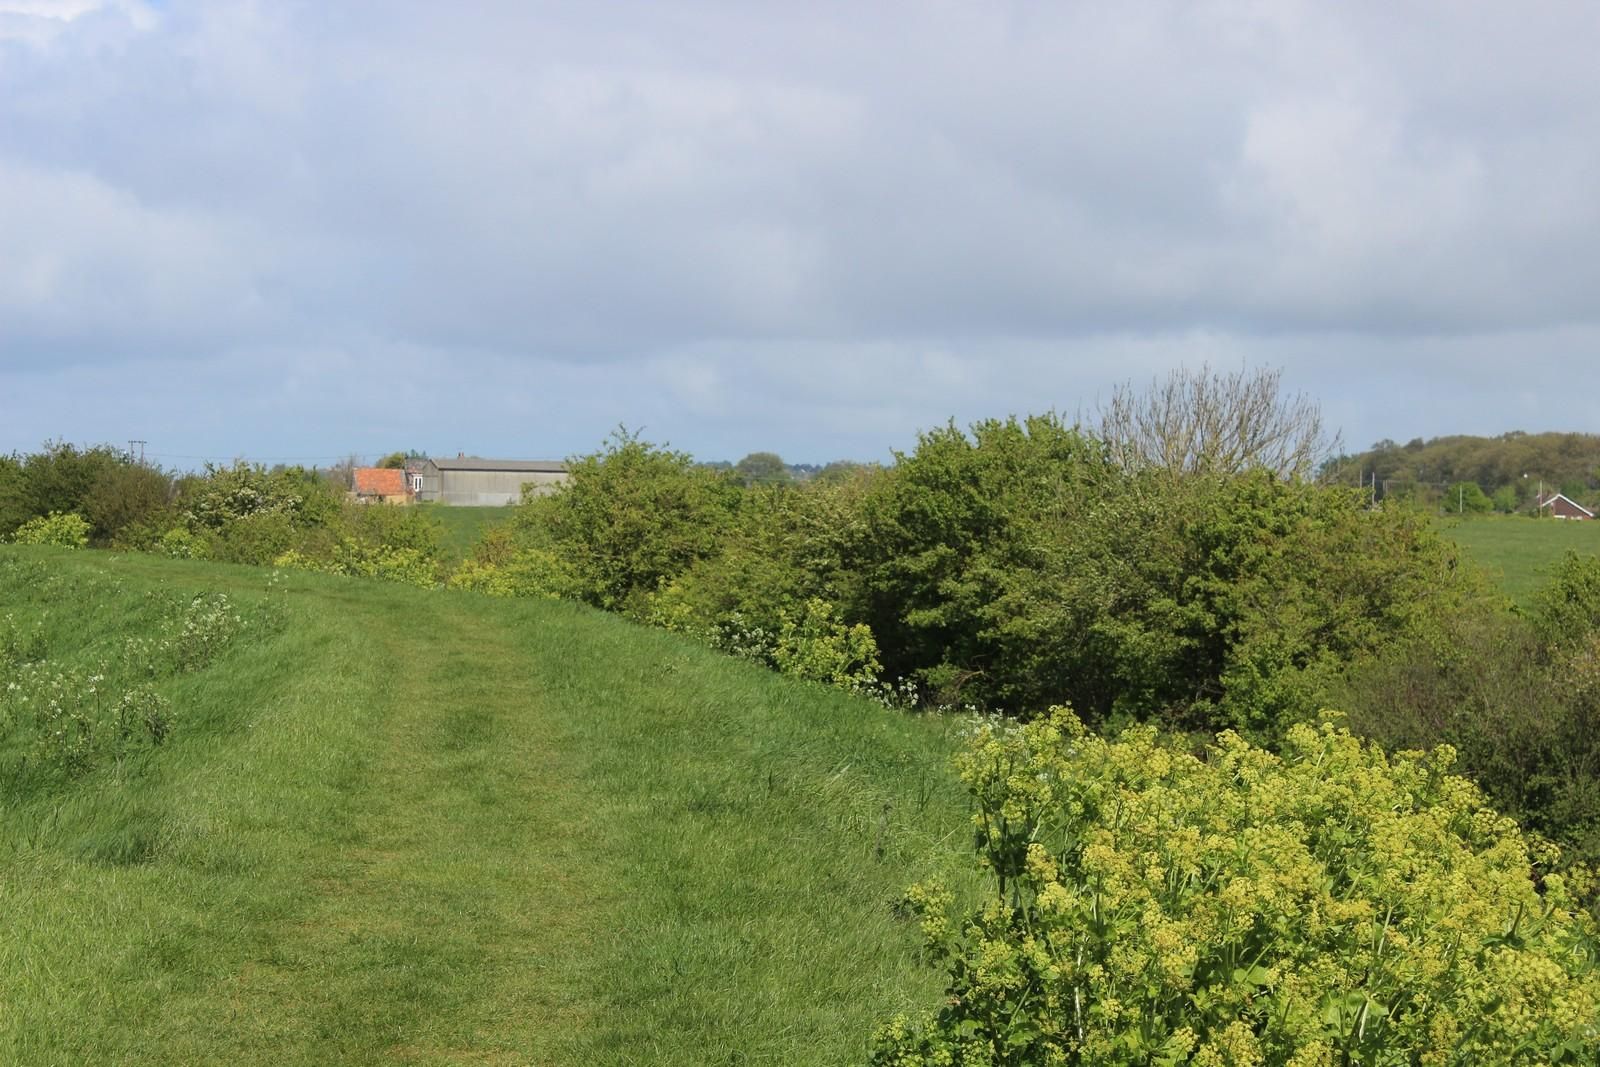 Walking along the Norfolk Coast Path with views of green fields and headgerows with a house in the distance